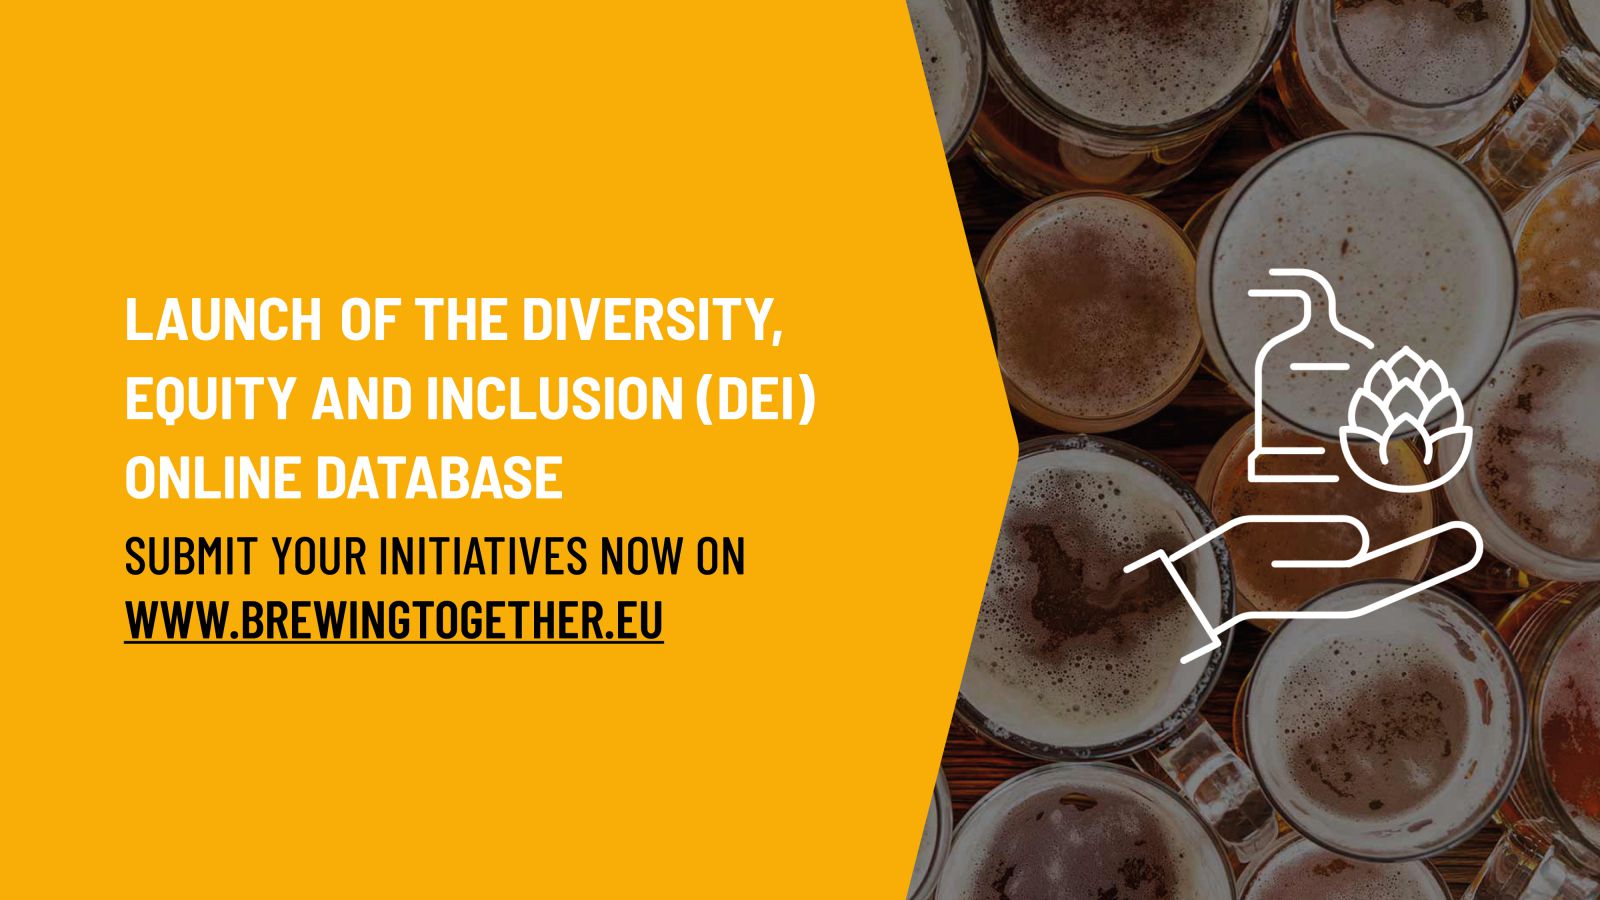 Launch of the Diversity, Equity and Inclusion (DEI) database on brewingtogether.eu